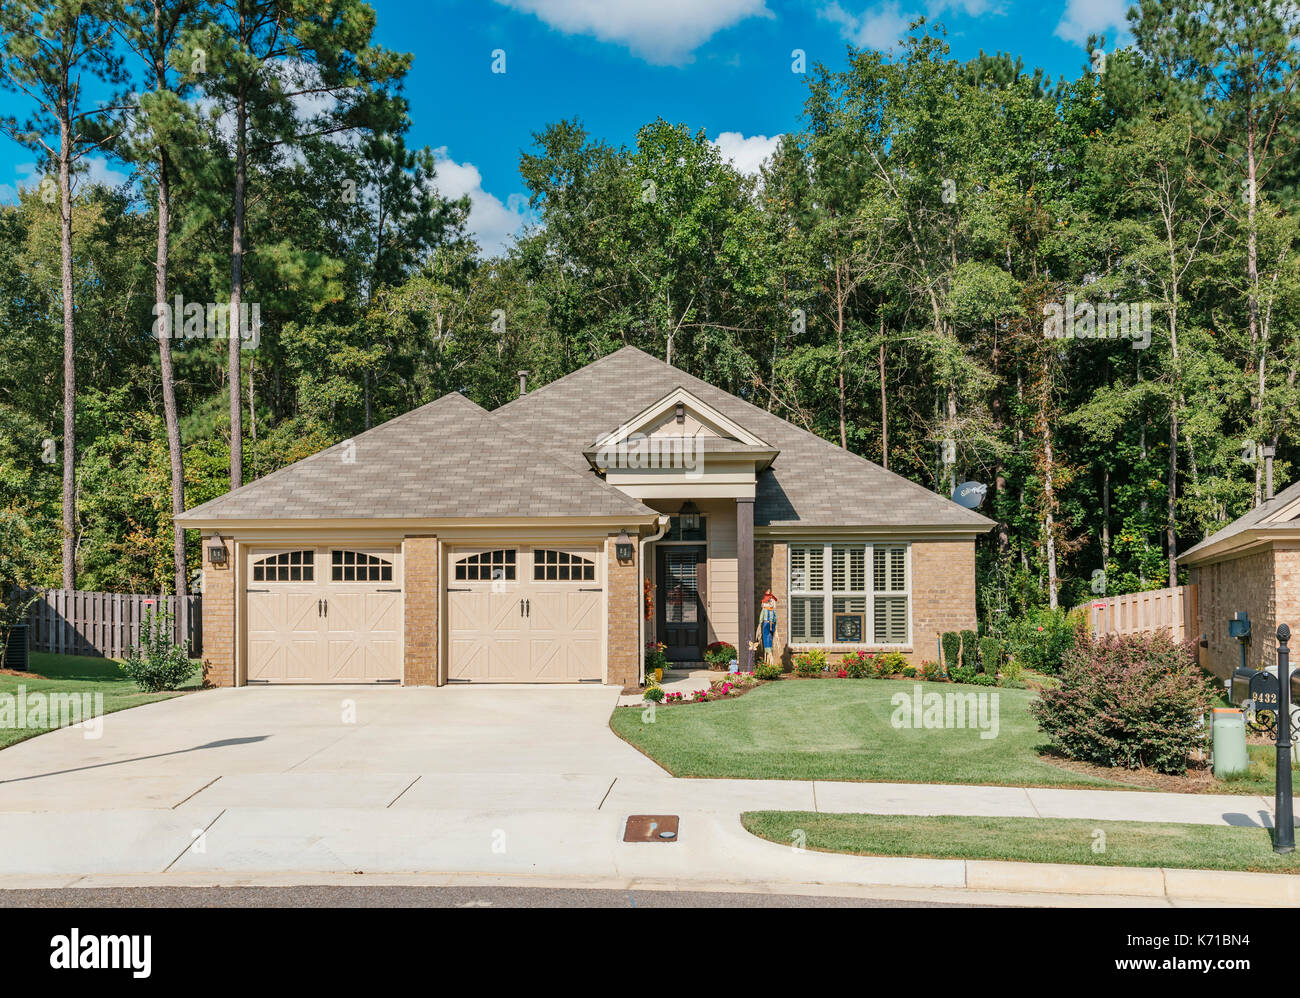 Exterior of new brick home or house in a suburban neighborhood in the suburbs of Montgomery Alabama, USA. Stock Photo